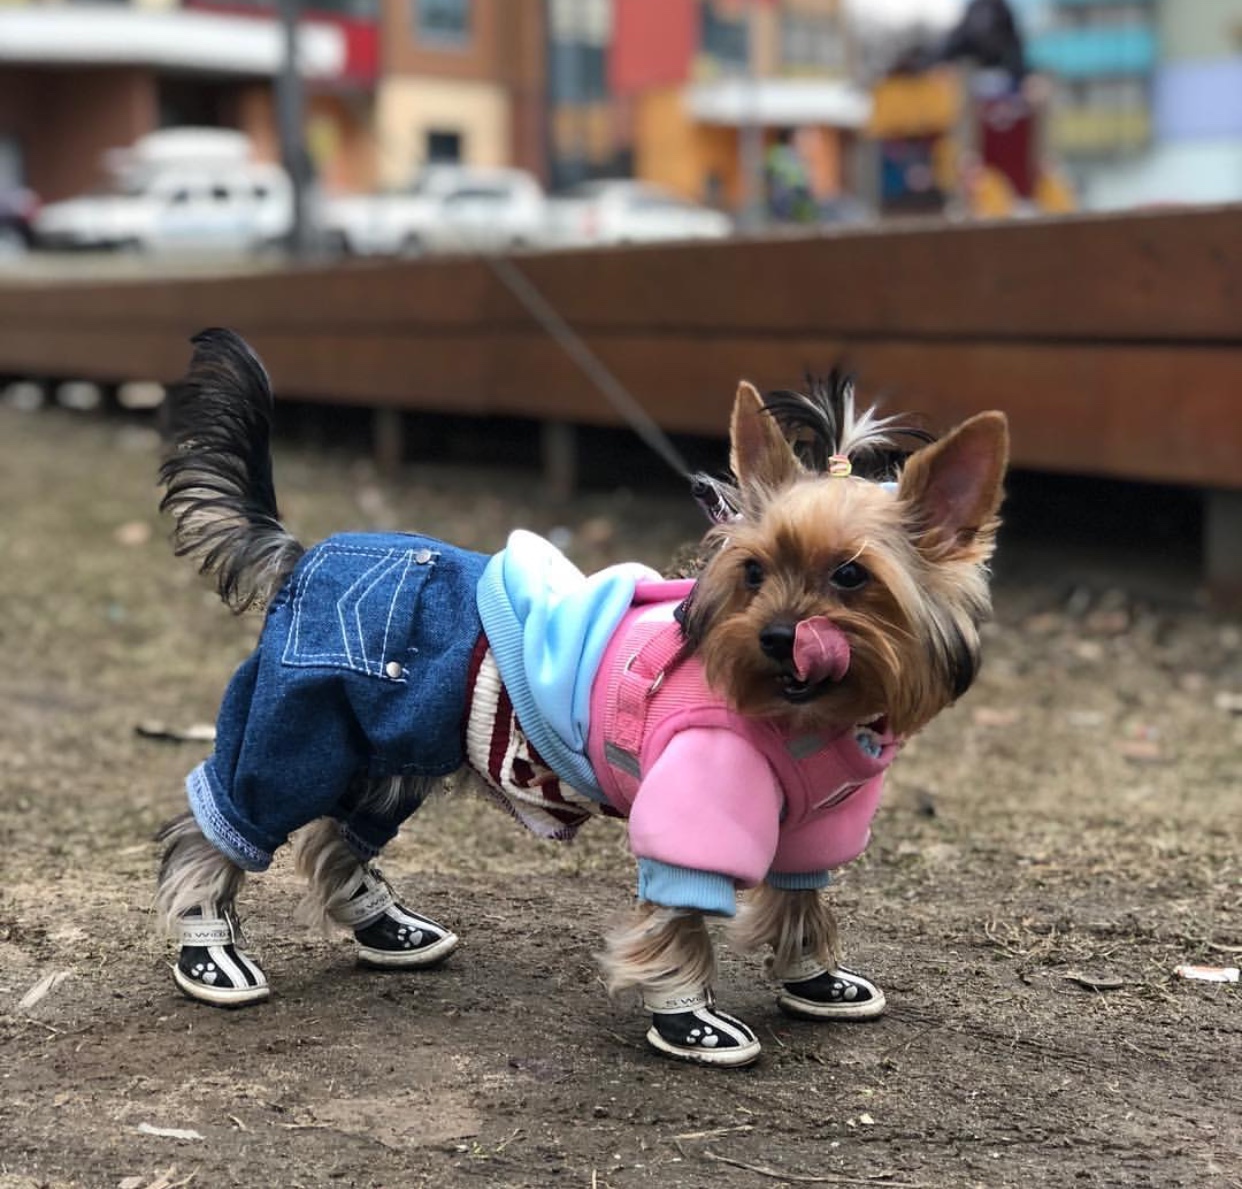 A Yorkshire Terrier wearing a jacket, pants and shoes while standing on the ground and licking its mouth